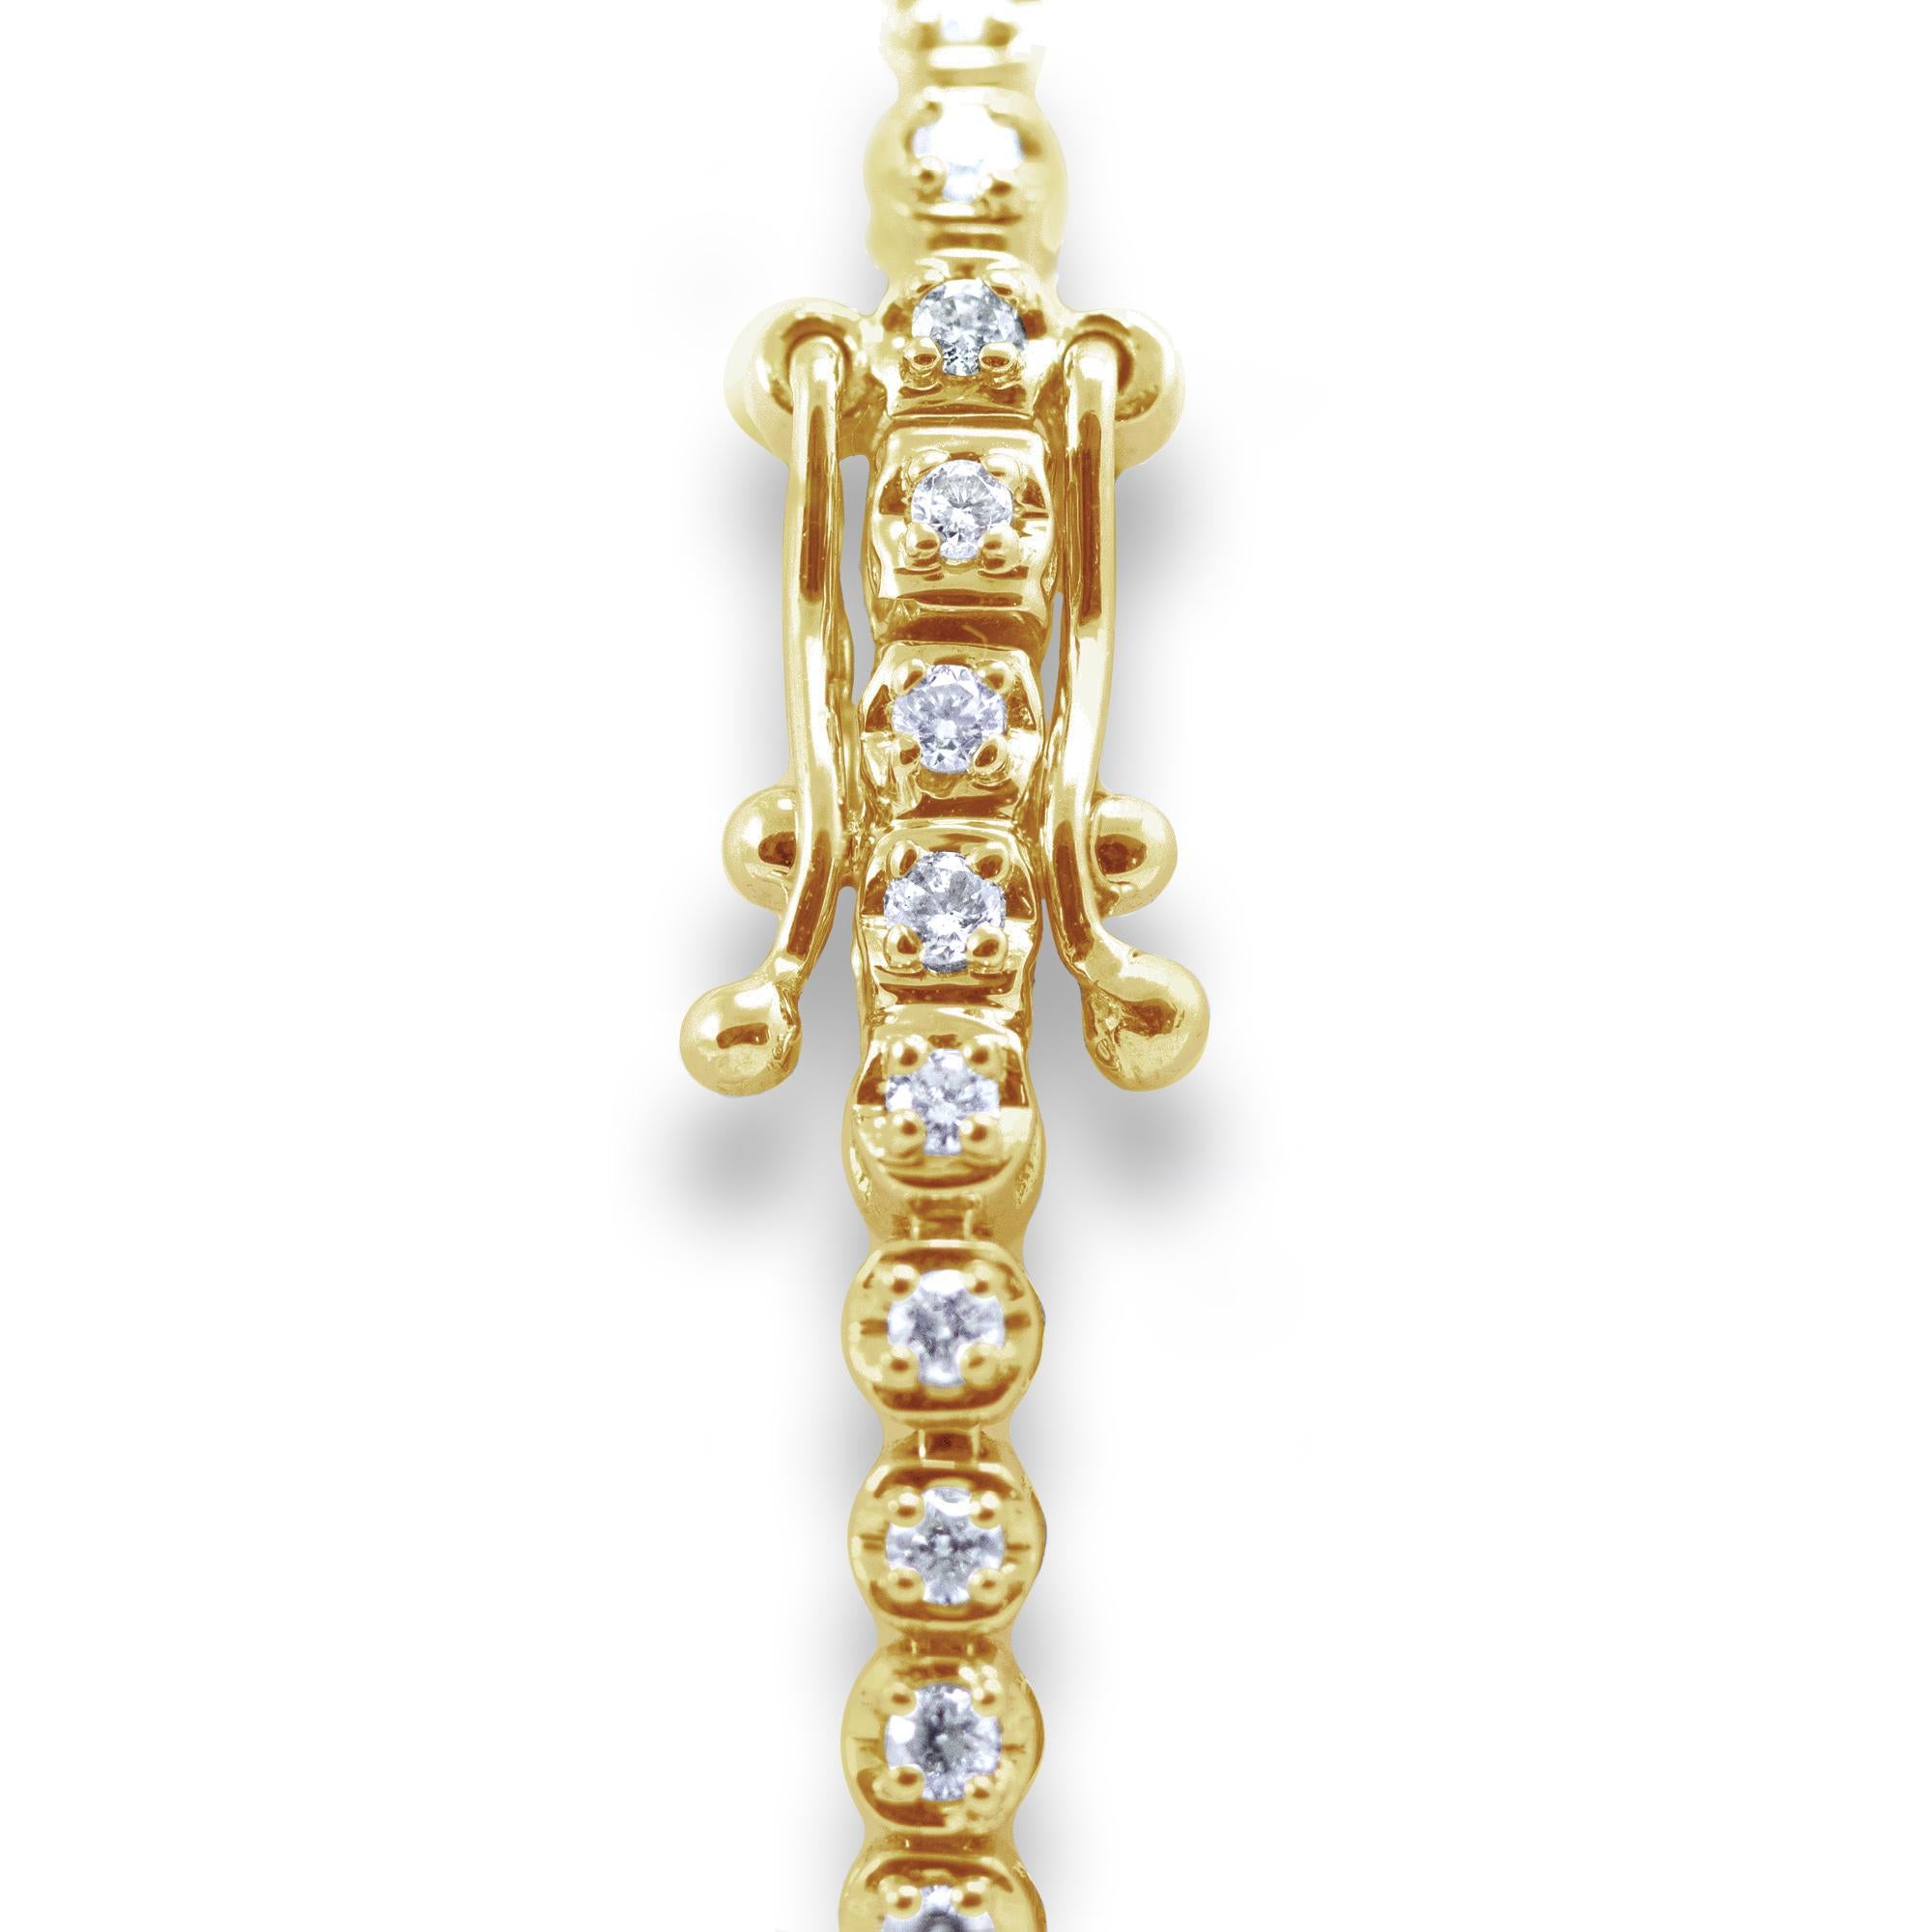 This Round Brilliant Diamond Tennis Bracelet is made in 14 karat Yellow Gold, set with natural, colourless diamonds. With a total diamond carat weight (approximate) of 0.50 carat, The Diamonds are G-H colour, VS-Si clarity. Also comes in 14 karat